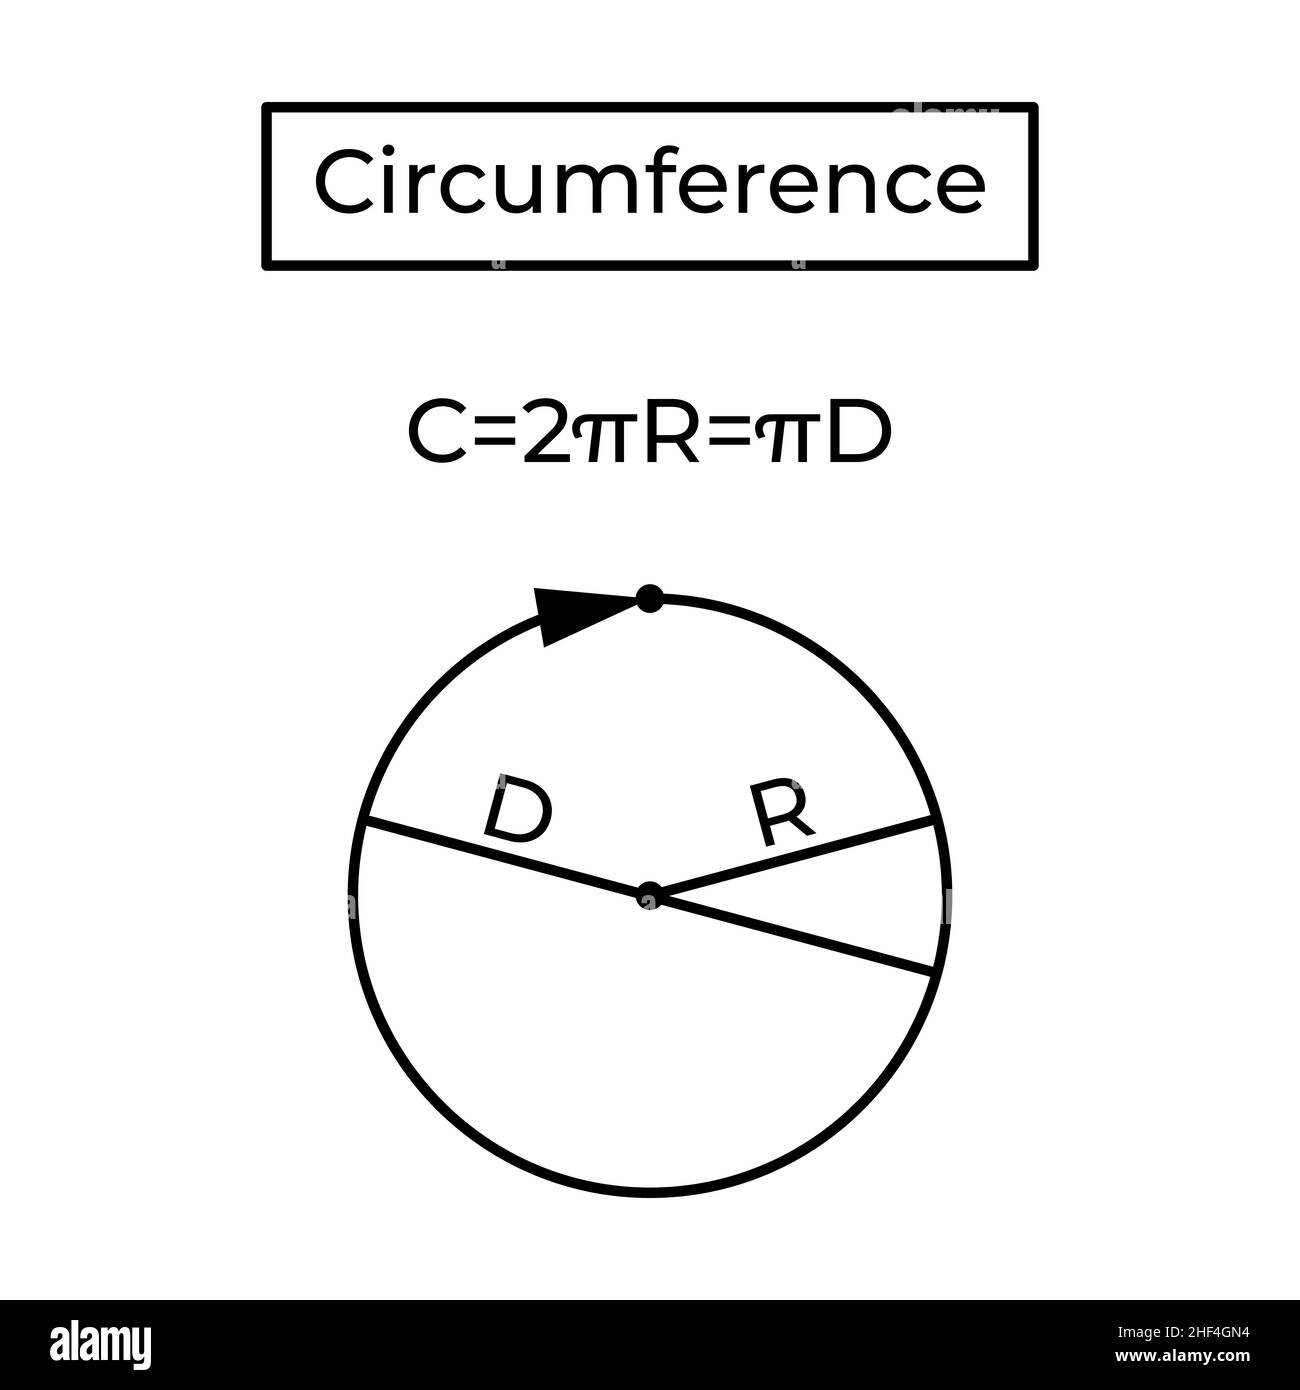 Circumference and formula. Stock Vector